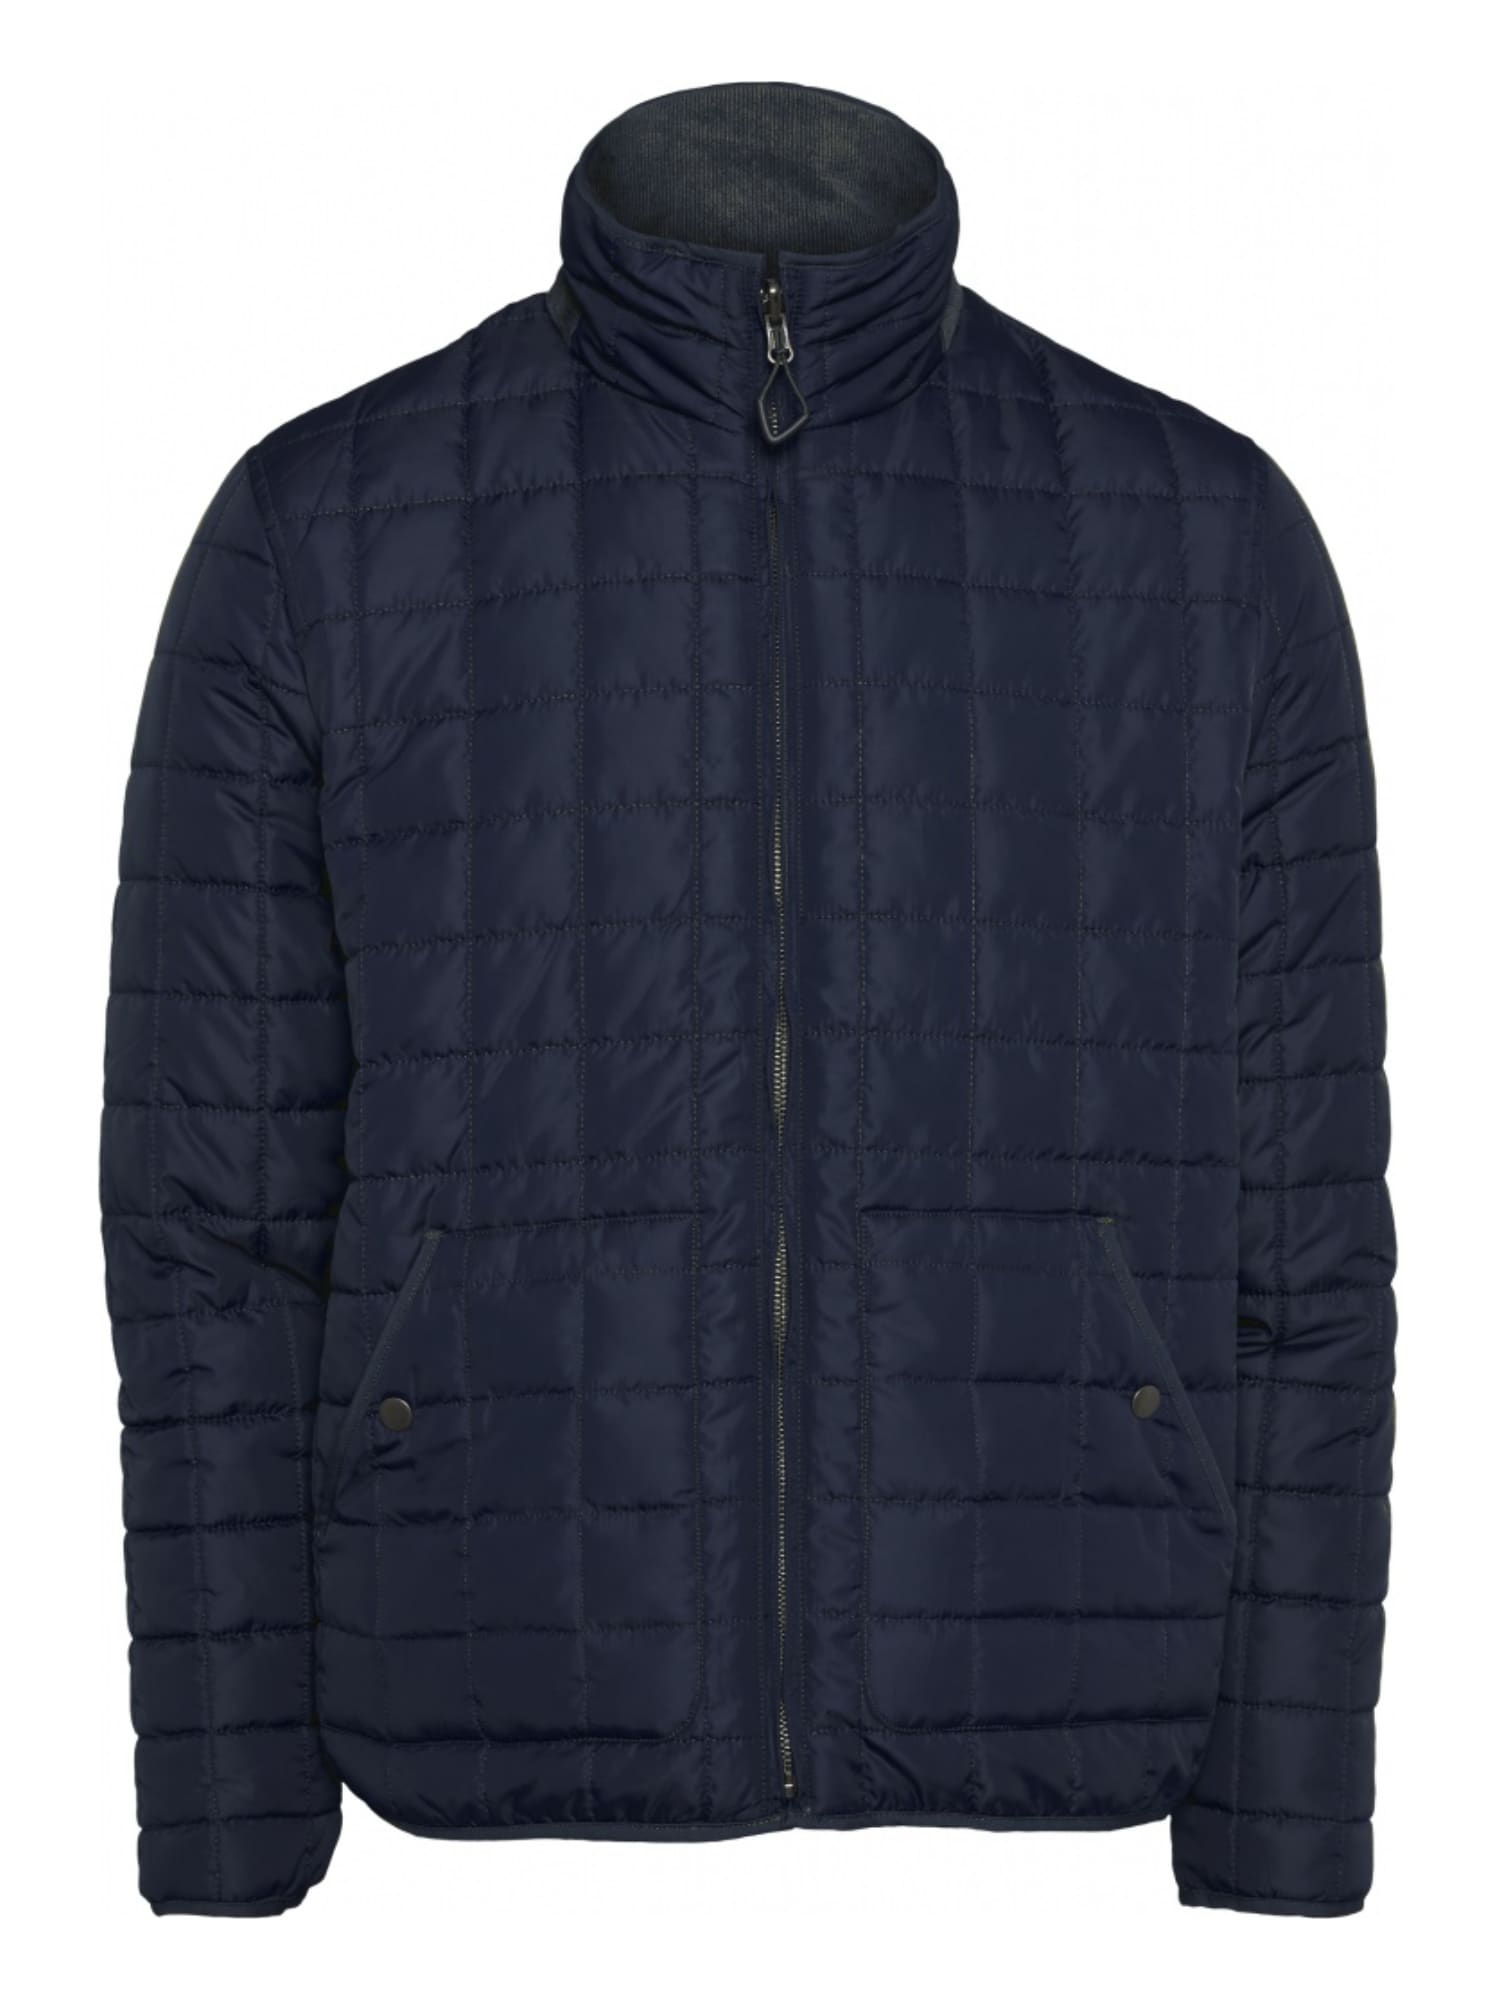 KnowledgeCotton Apparel Jacke Fjord reversible quilted jacket in Navy 